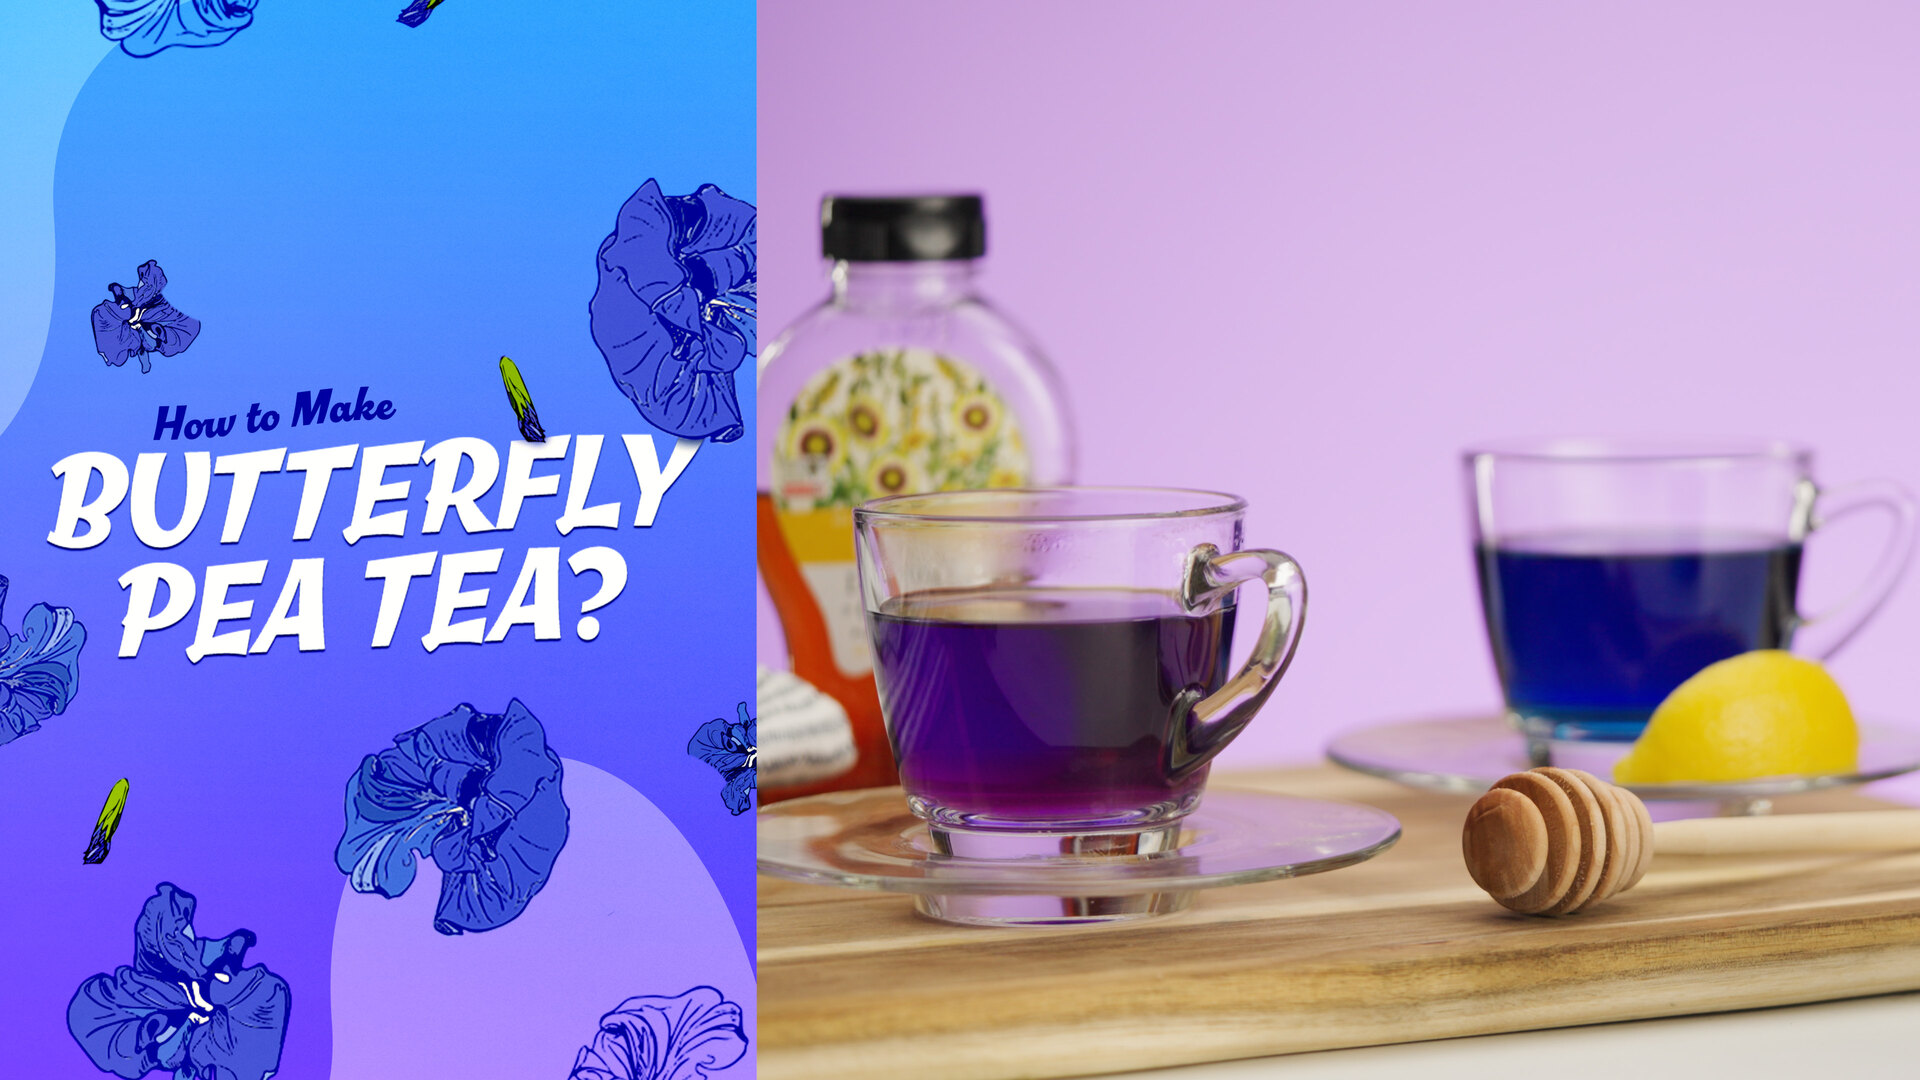 How to Make Butterfly Pea Tea Video